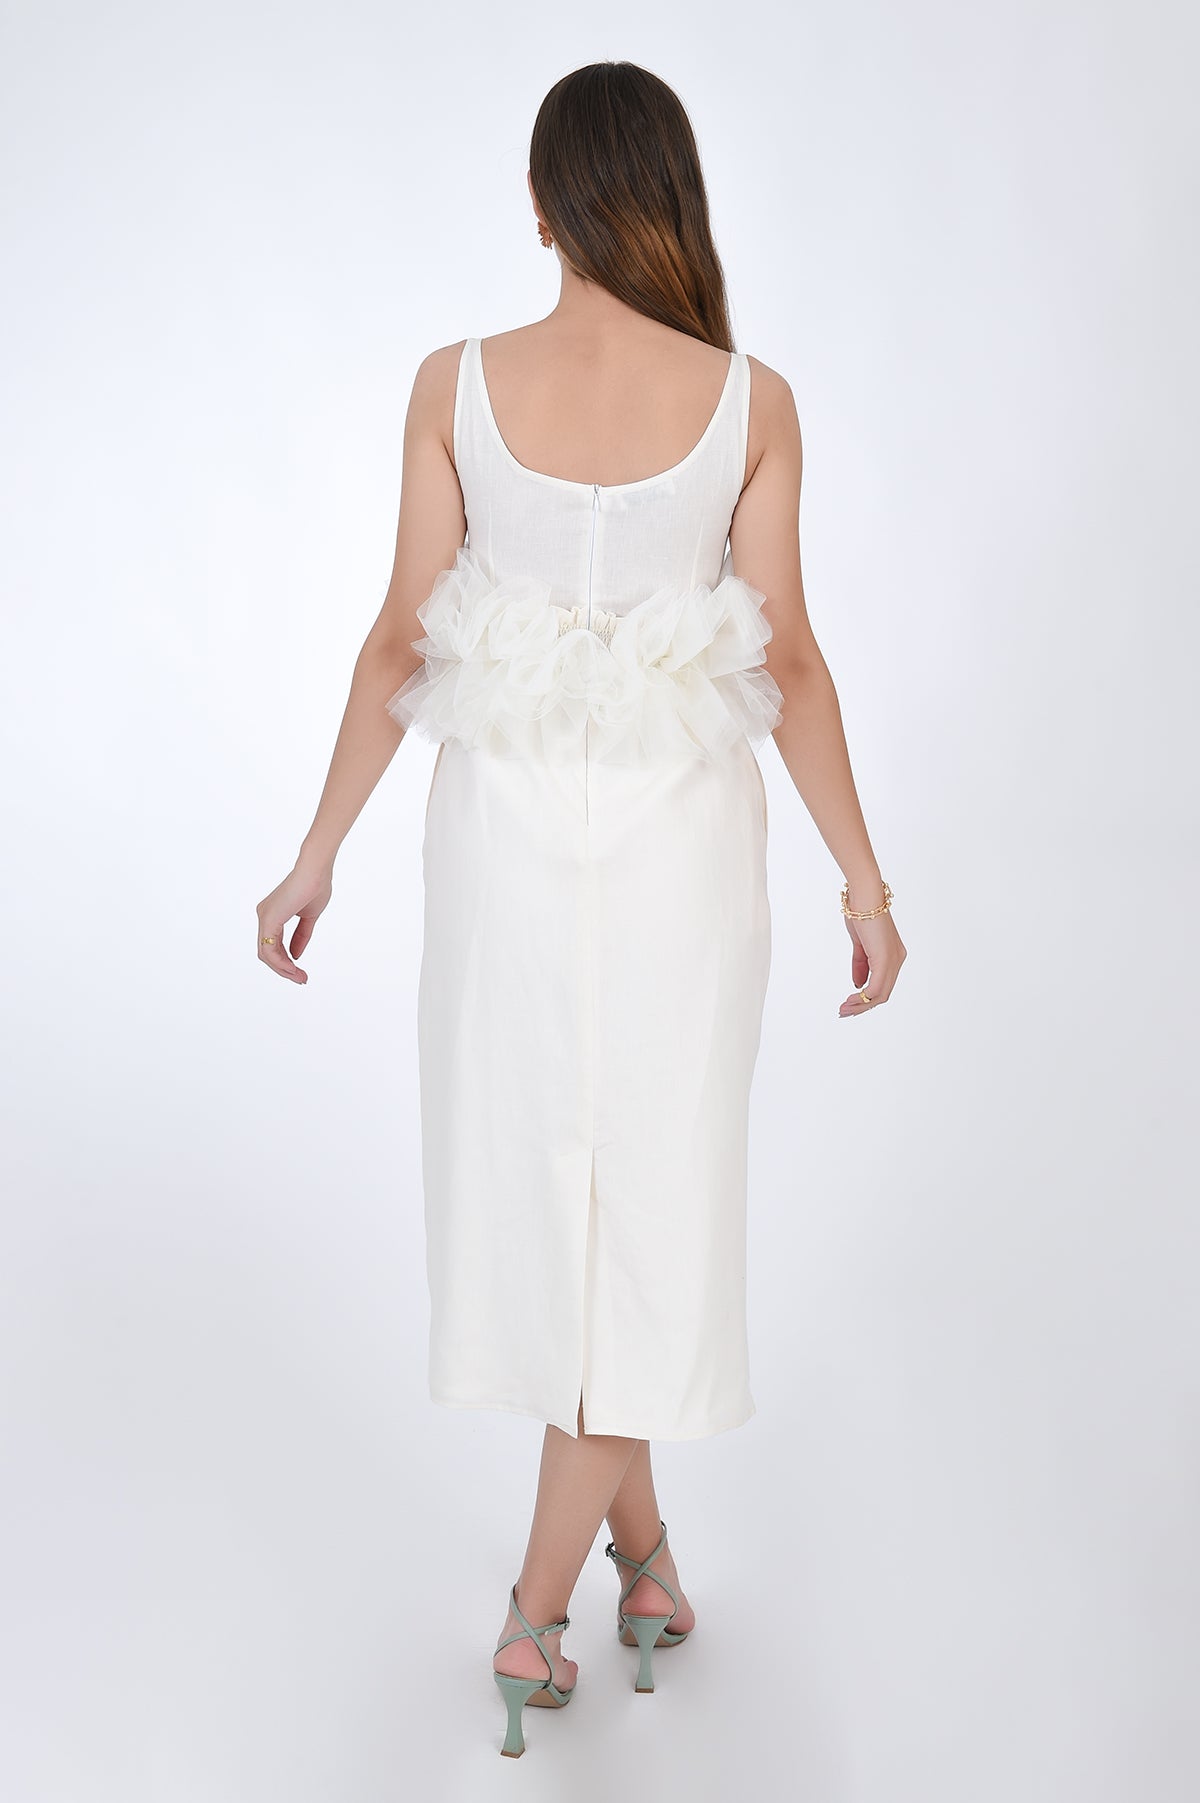 Fanm Mon Citra Linen &amp; Tulle Midi Dress, back view. Featuring embroidery detail at the chest, and tulling at the waist.  